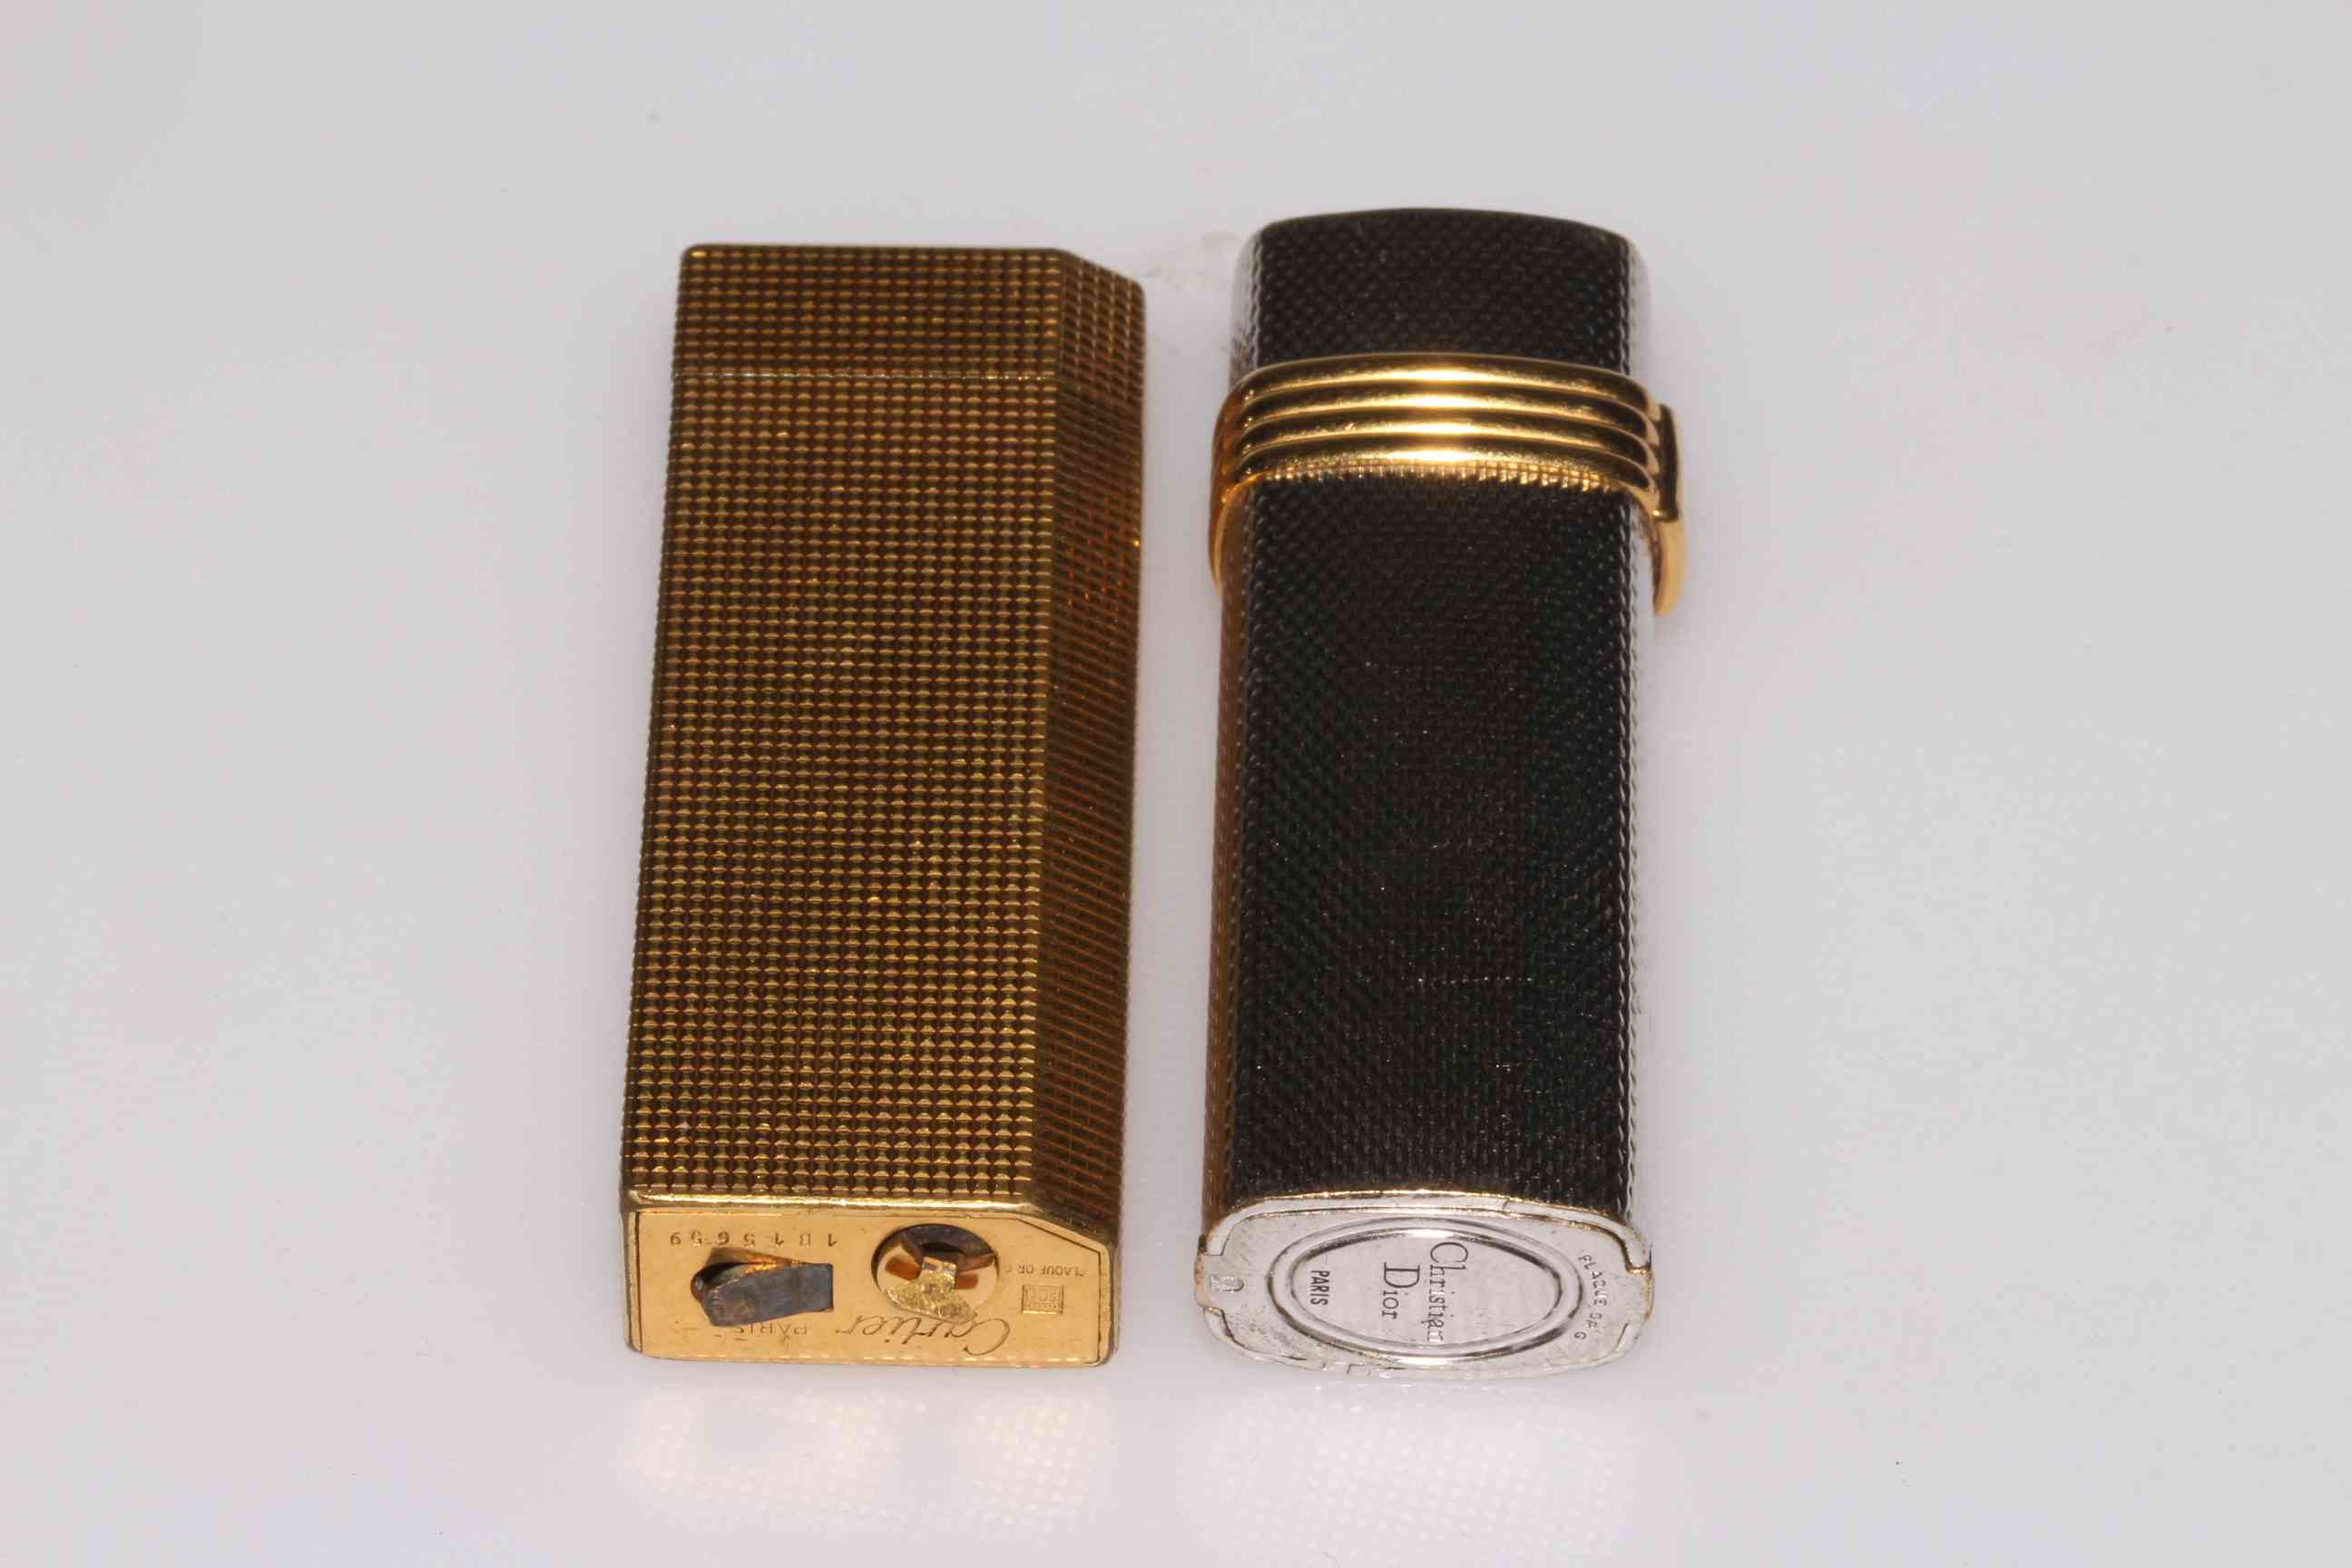 Cartier and Christian Dior cigarette lighters (2).